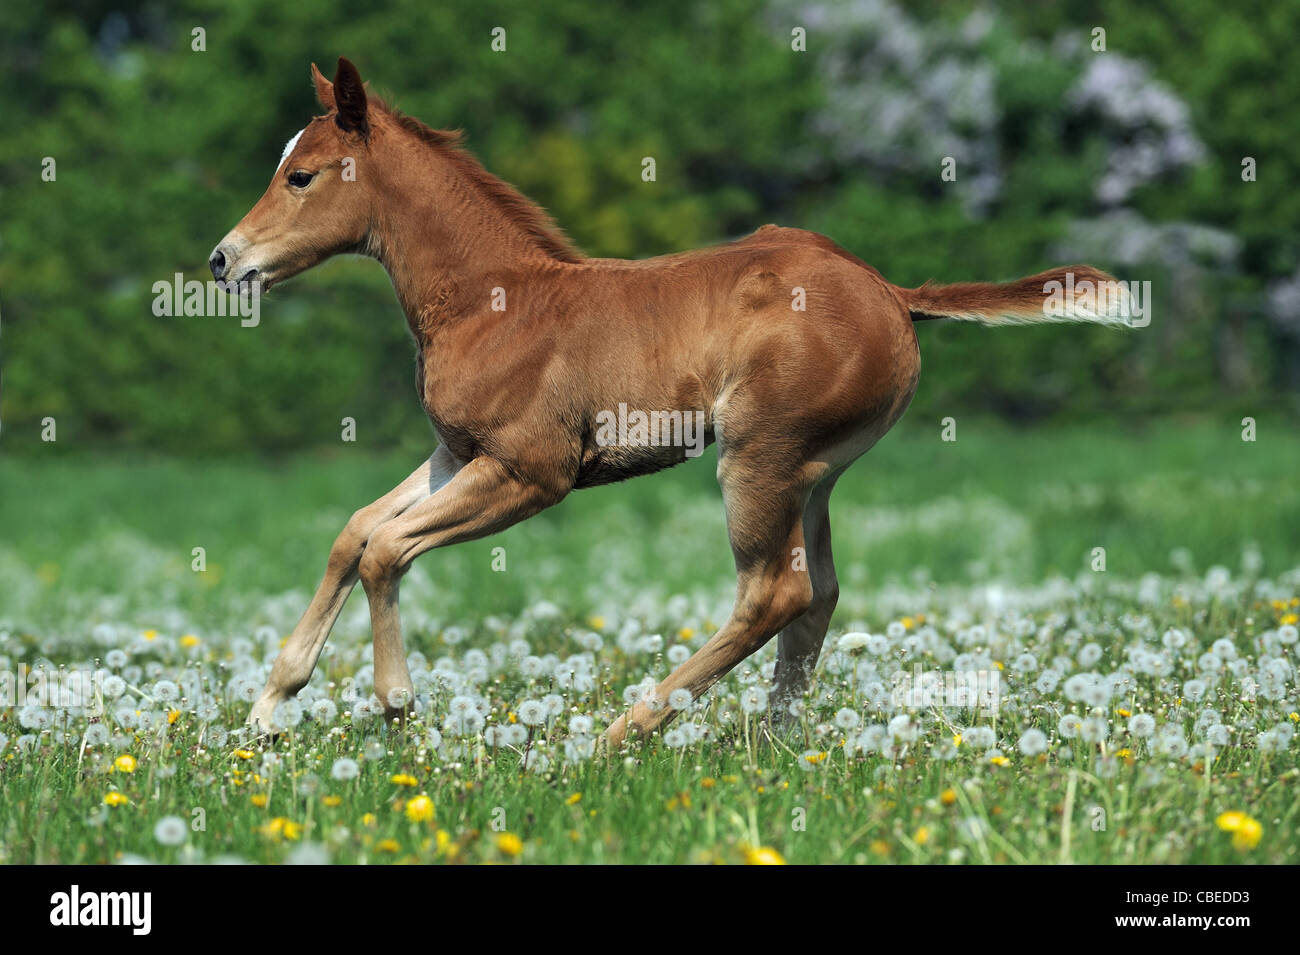 Quarter Horse (Equus ferus caballus). Chestnut foal in a gallop on a meadow. Stock Photo